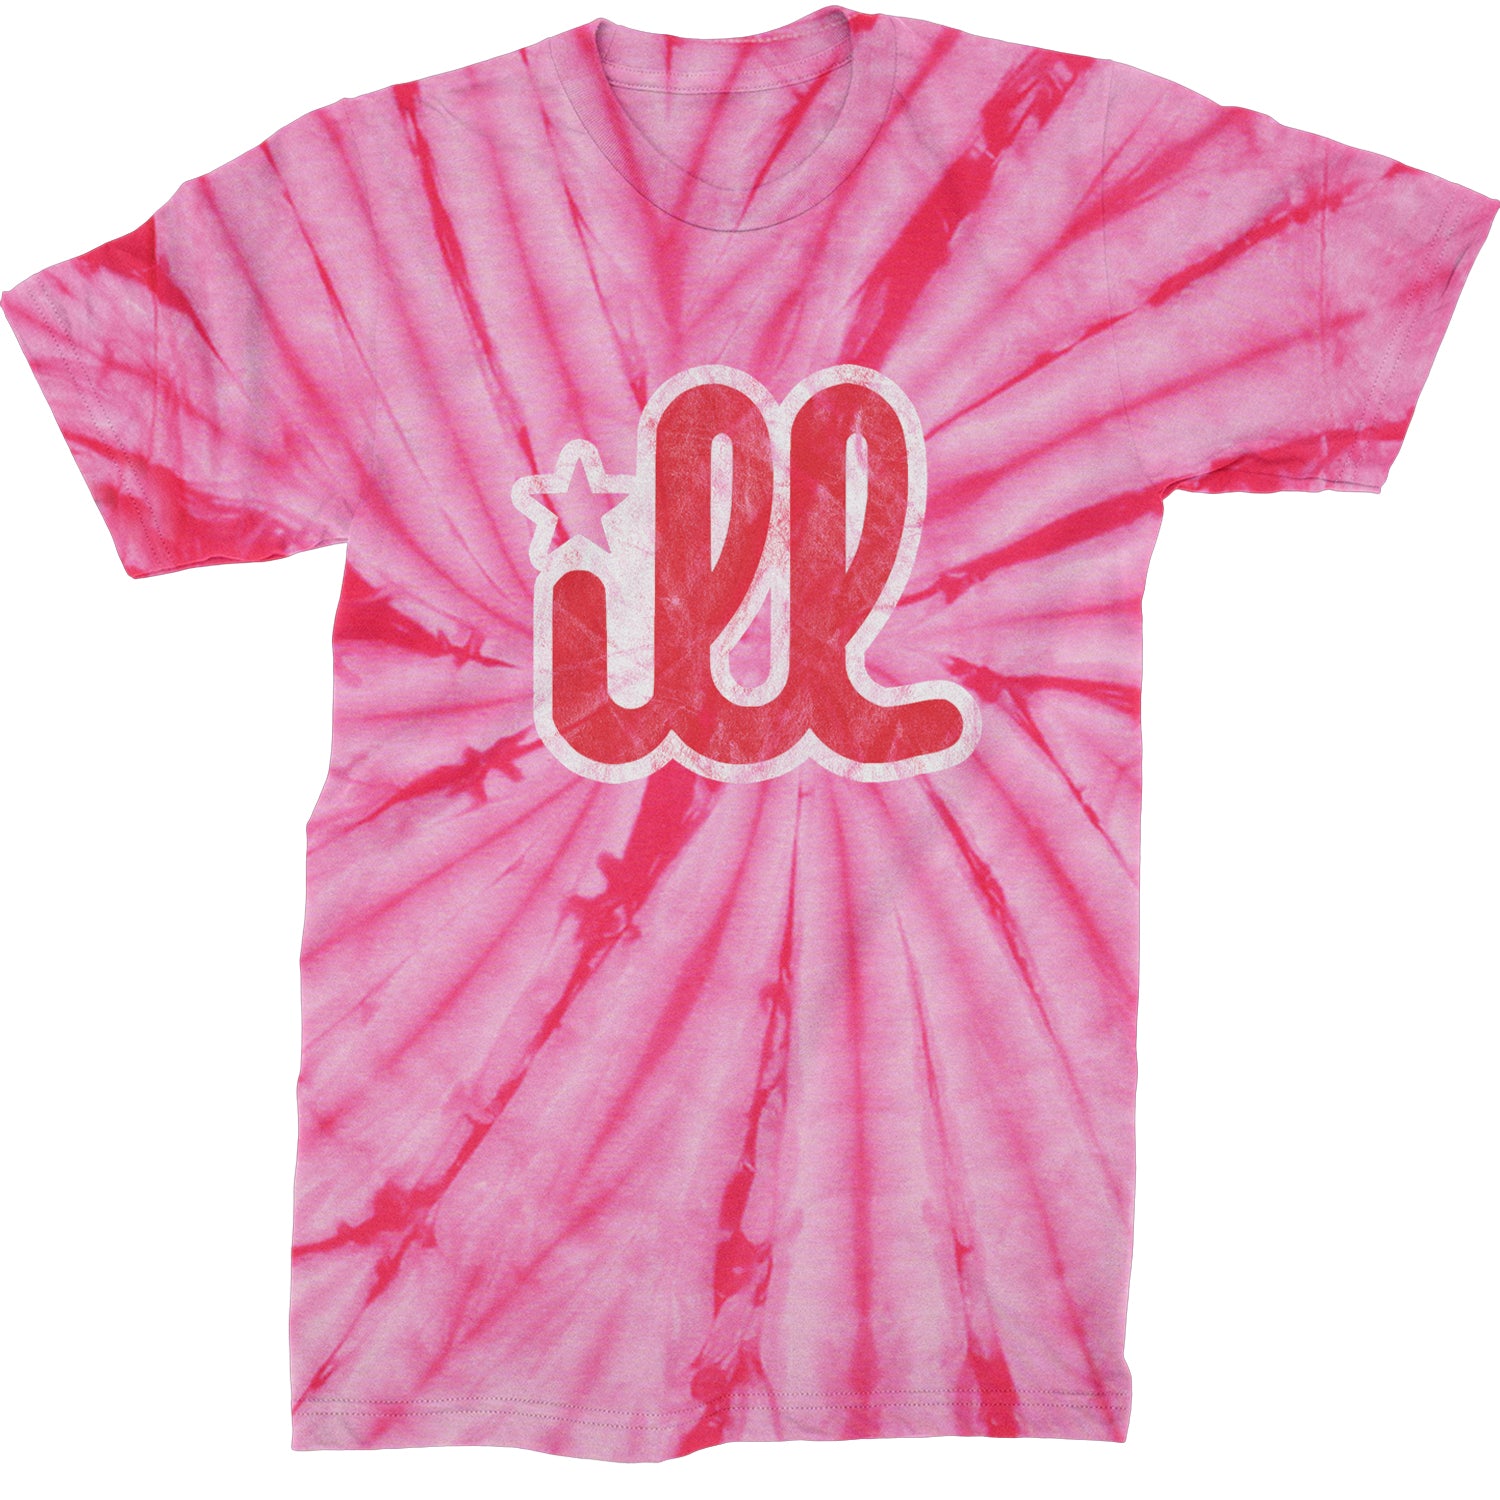 ILL Vintage It's A Philadelphia Philly Thing Mens T-shirt Tie-Dye Spider Pink